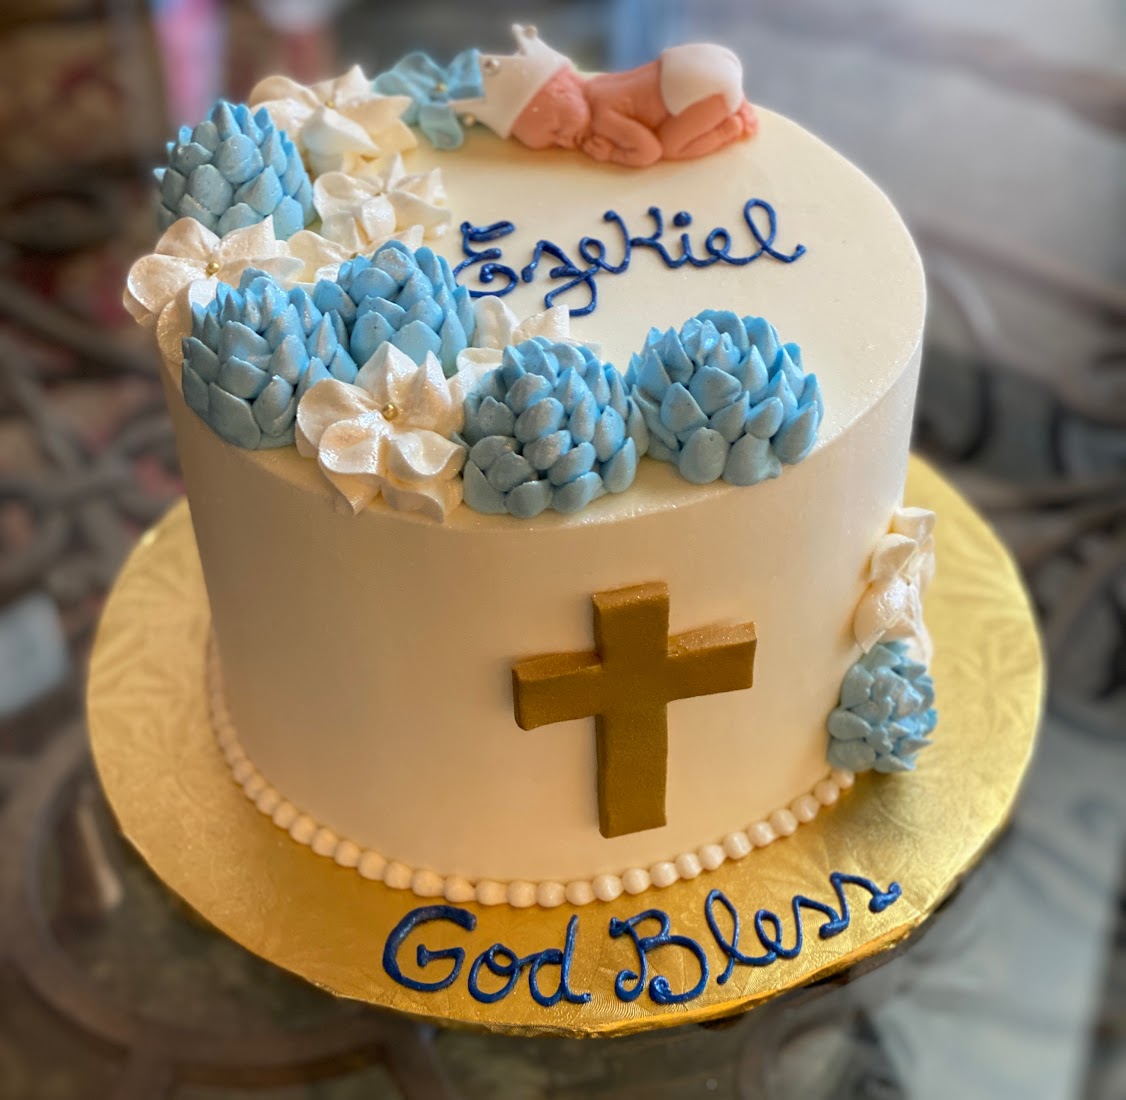 Baby Shower Cakes & Christening Cakes Ideas | Bakers & Cakers